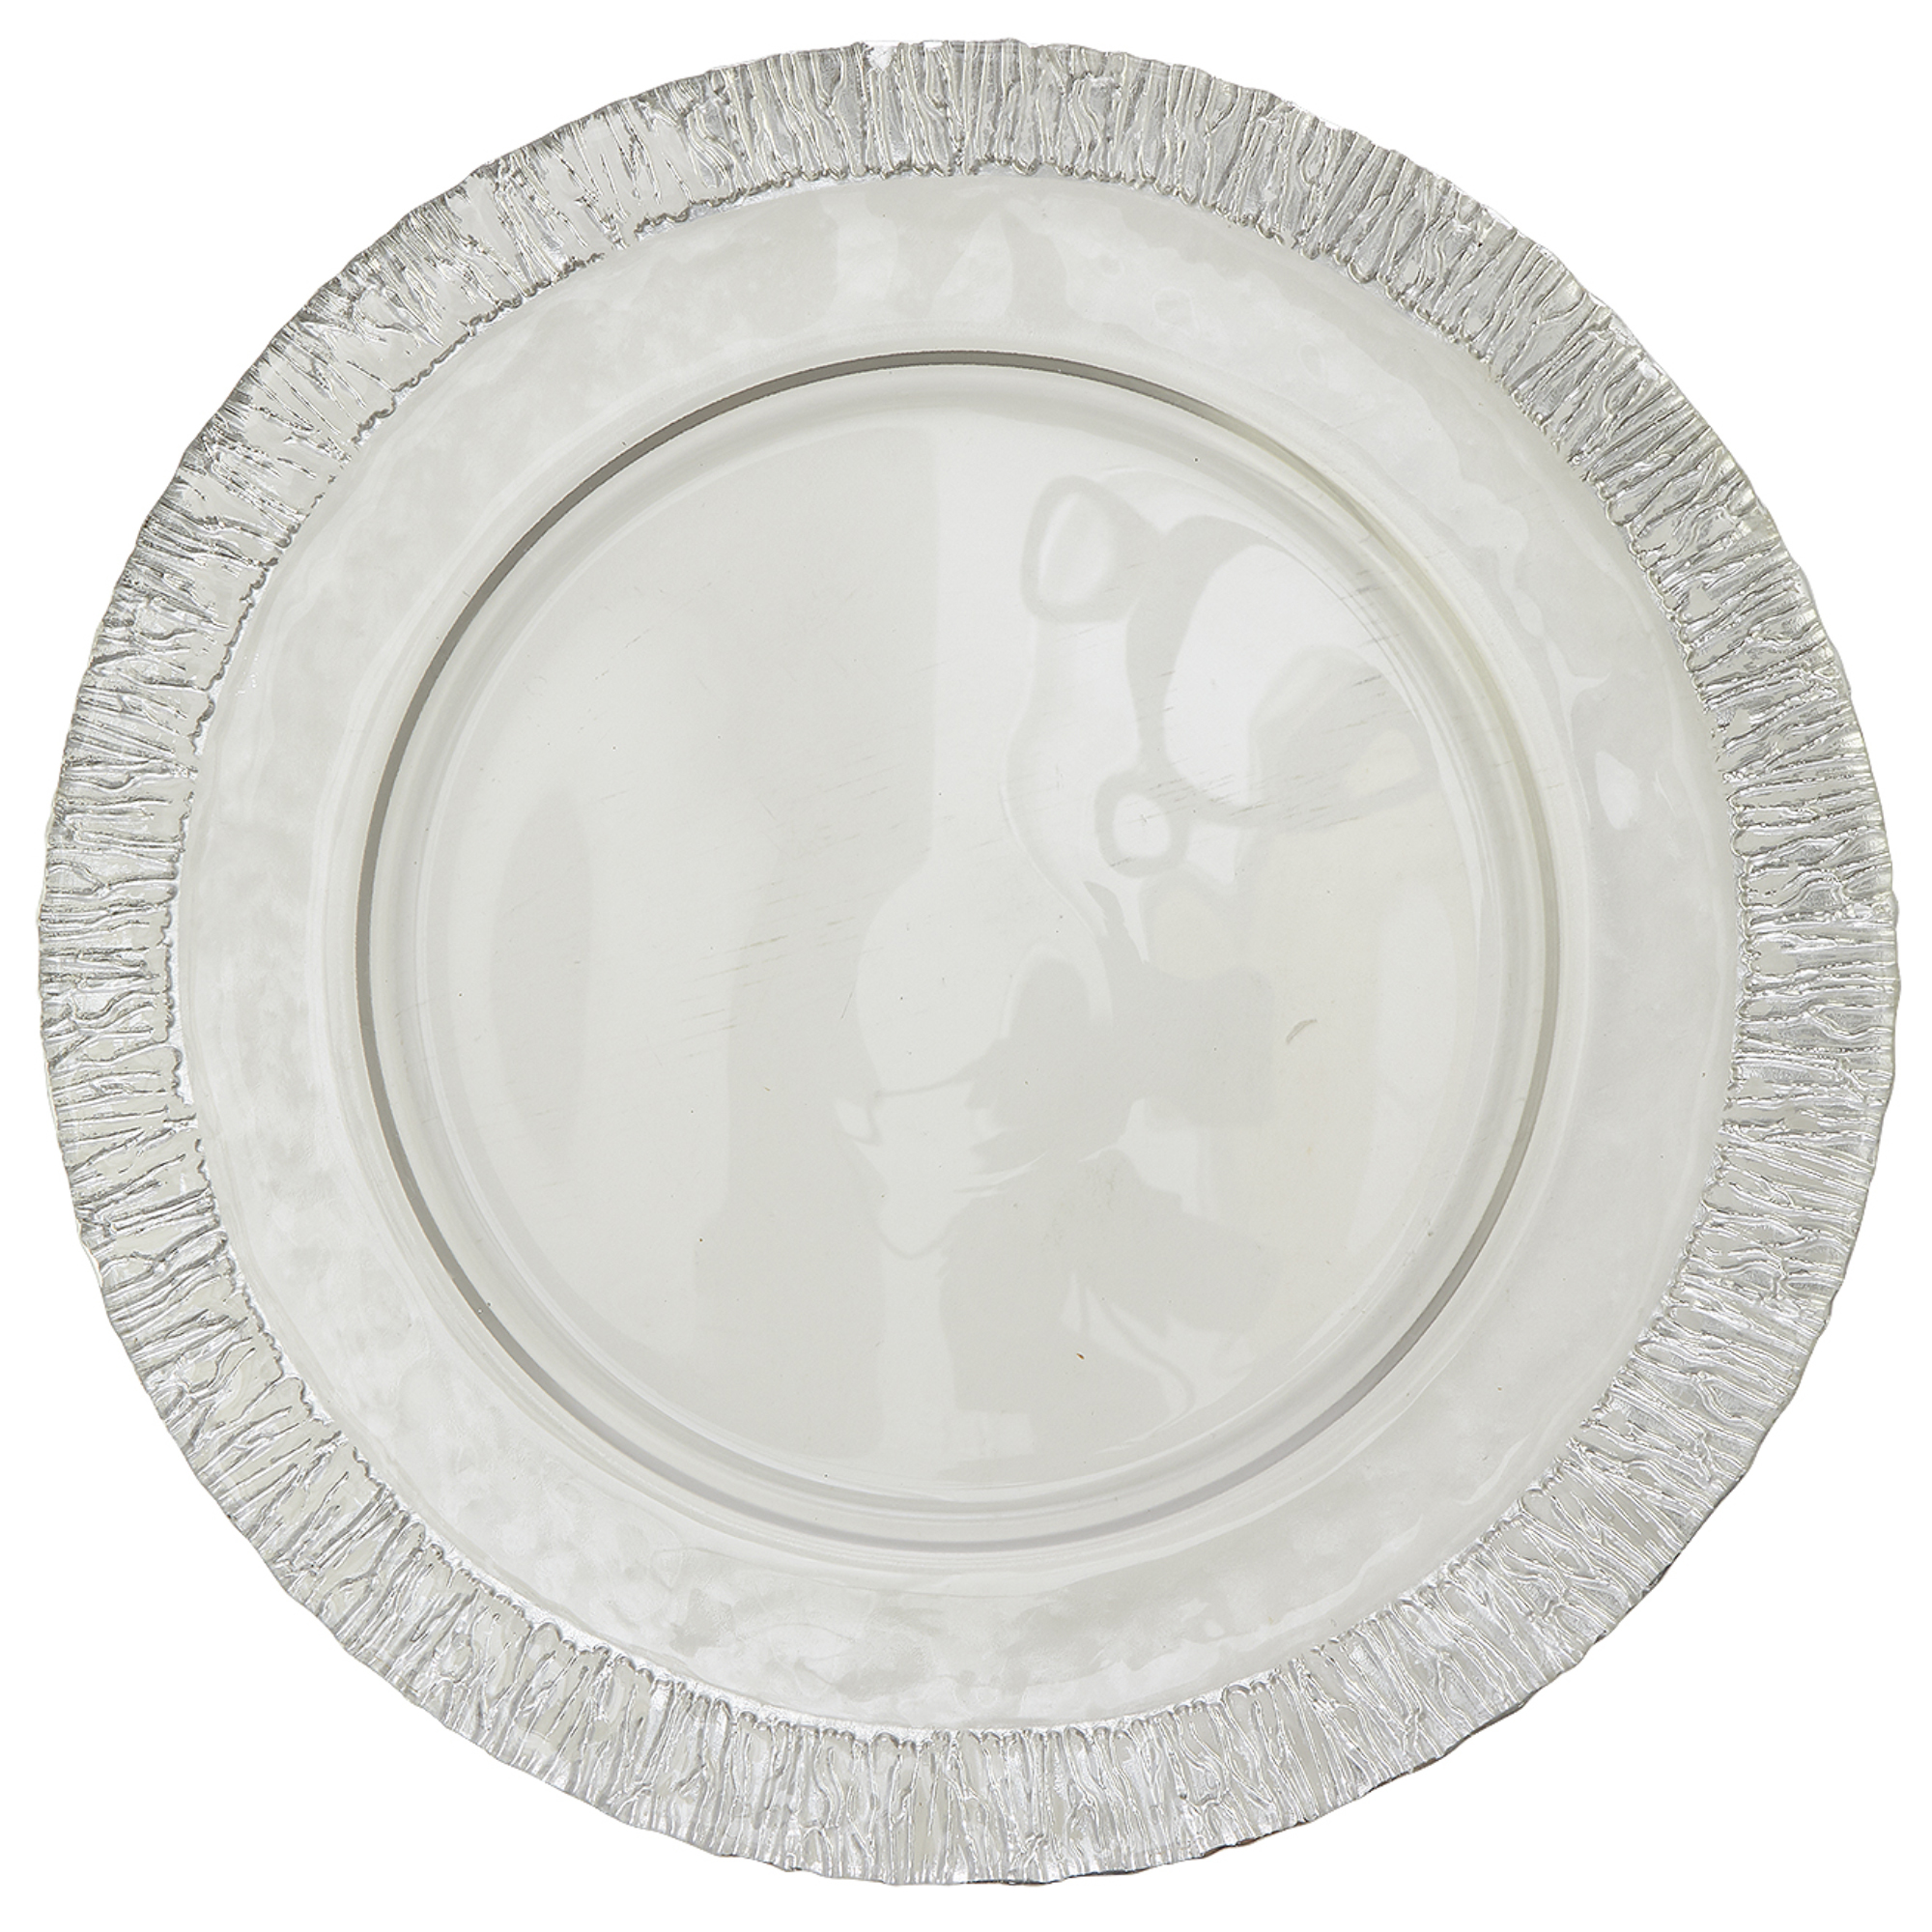 Wood Grain Edge Glass Charger Plate 13" - Silver